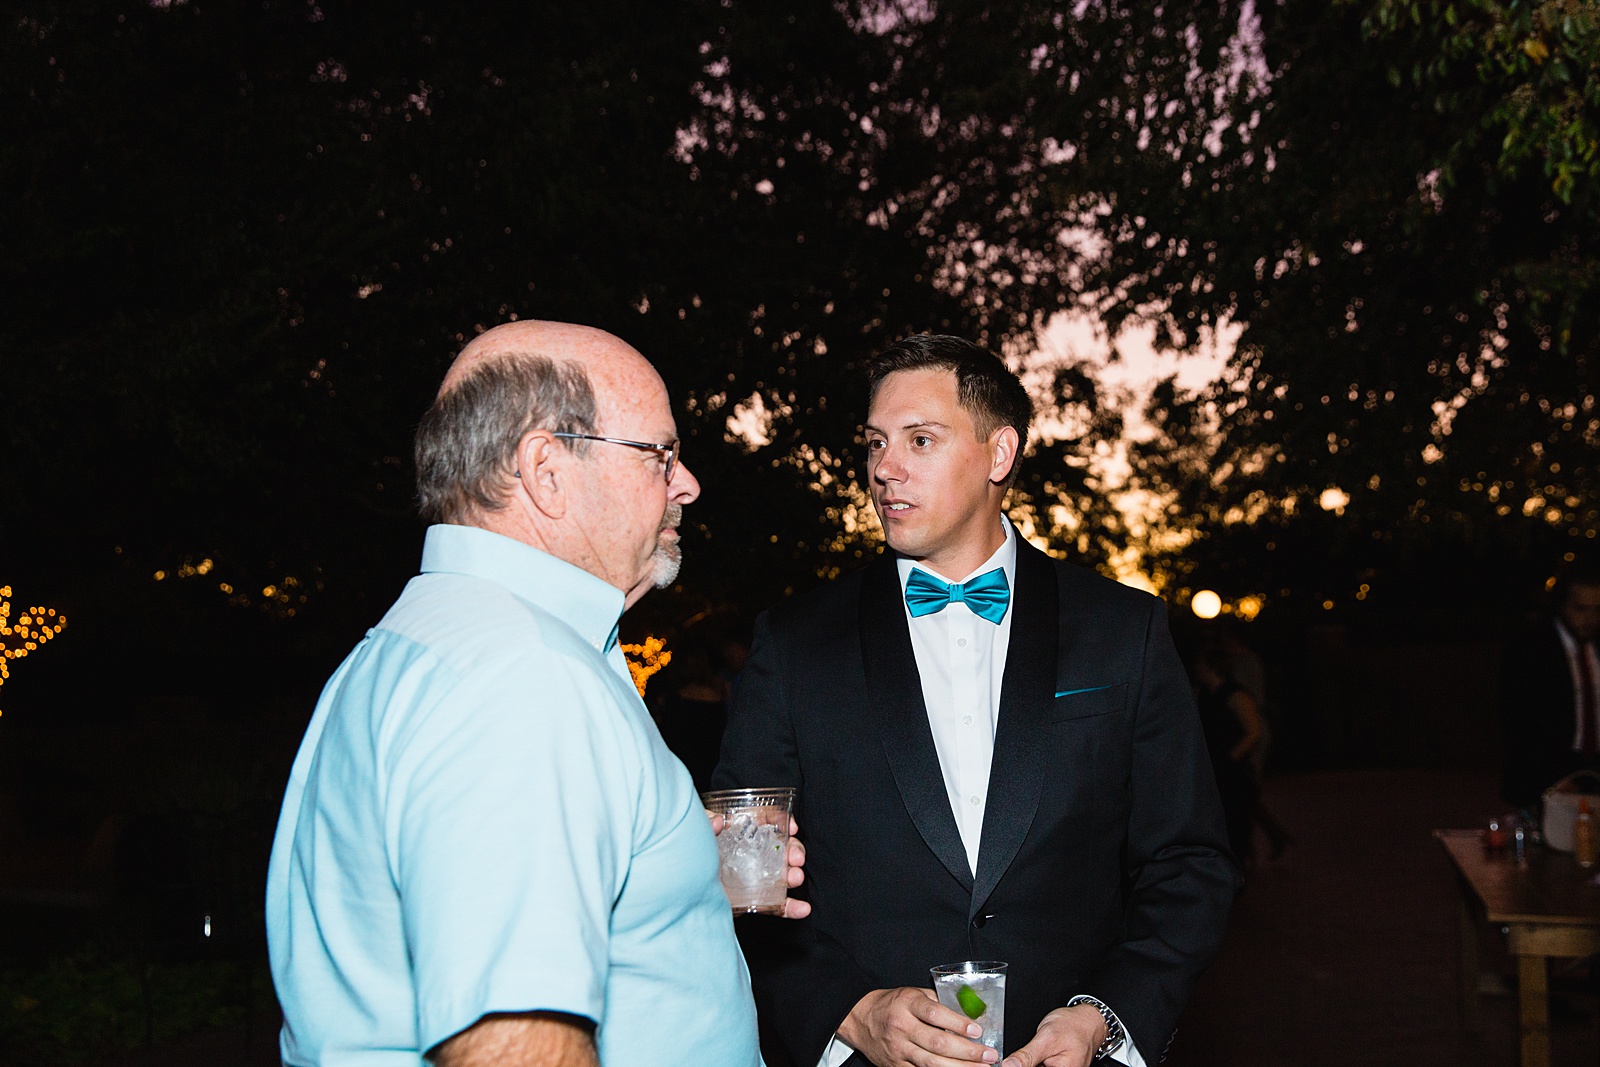 Candid photo of groom talking with guests during cocktail hour by Mesa wedding photographer PMA Photography.